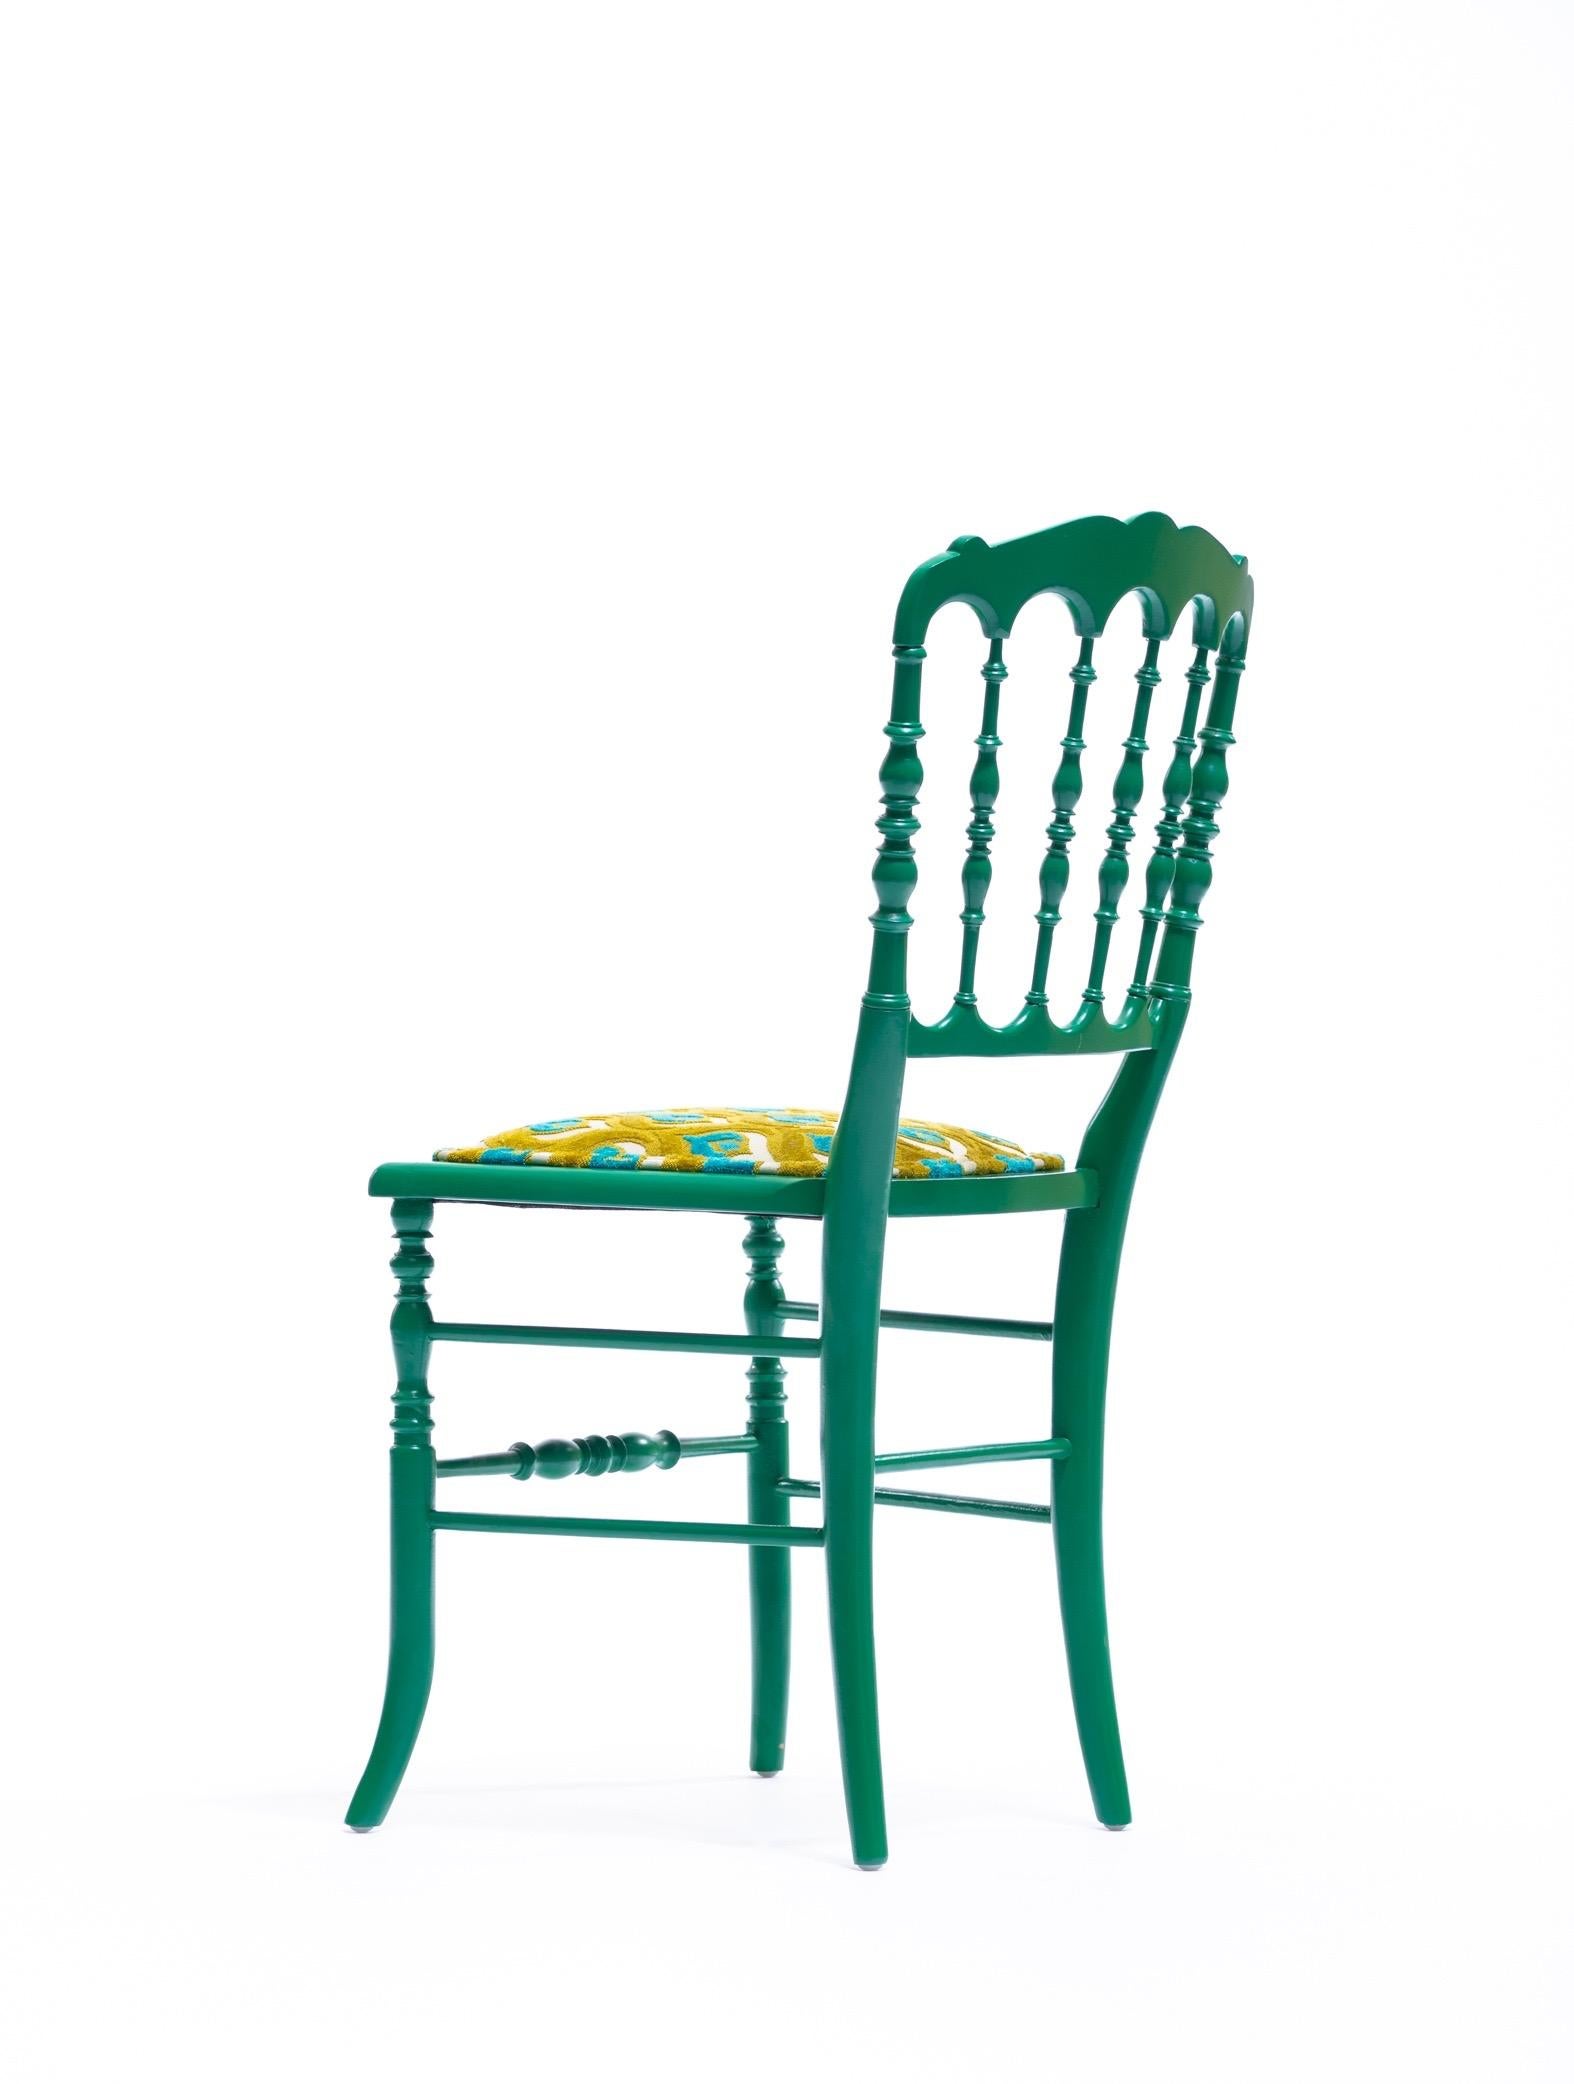 Mid-20th Century Green Lacquered Chiavari Side Chair with Peacock Feathers in Cut Velvet For Sale